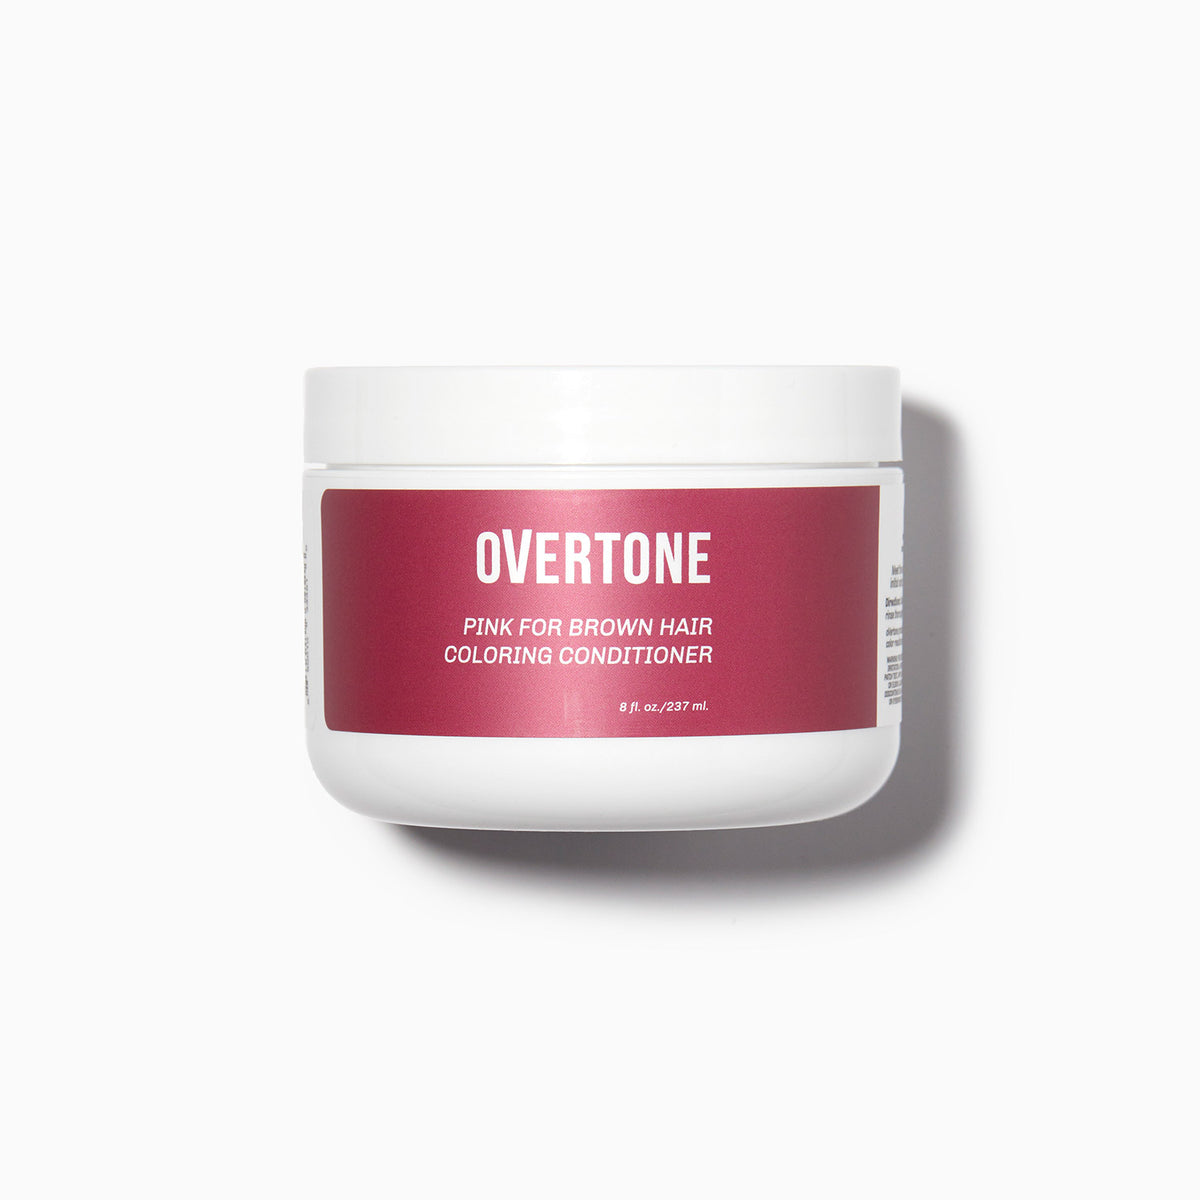 oVertone Pink for Brown Hair Coloring Conditioner